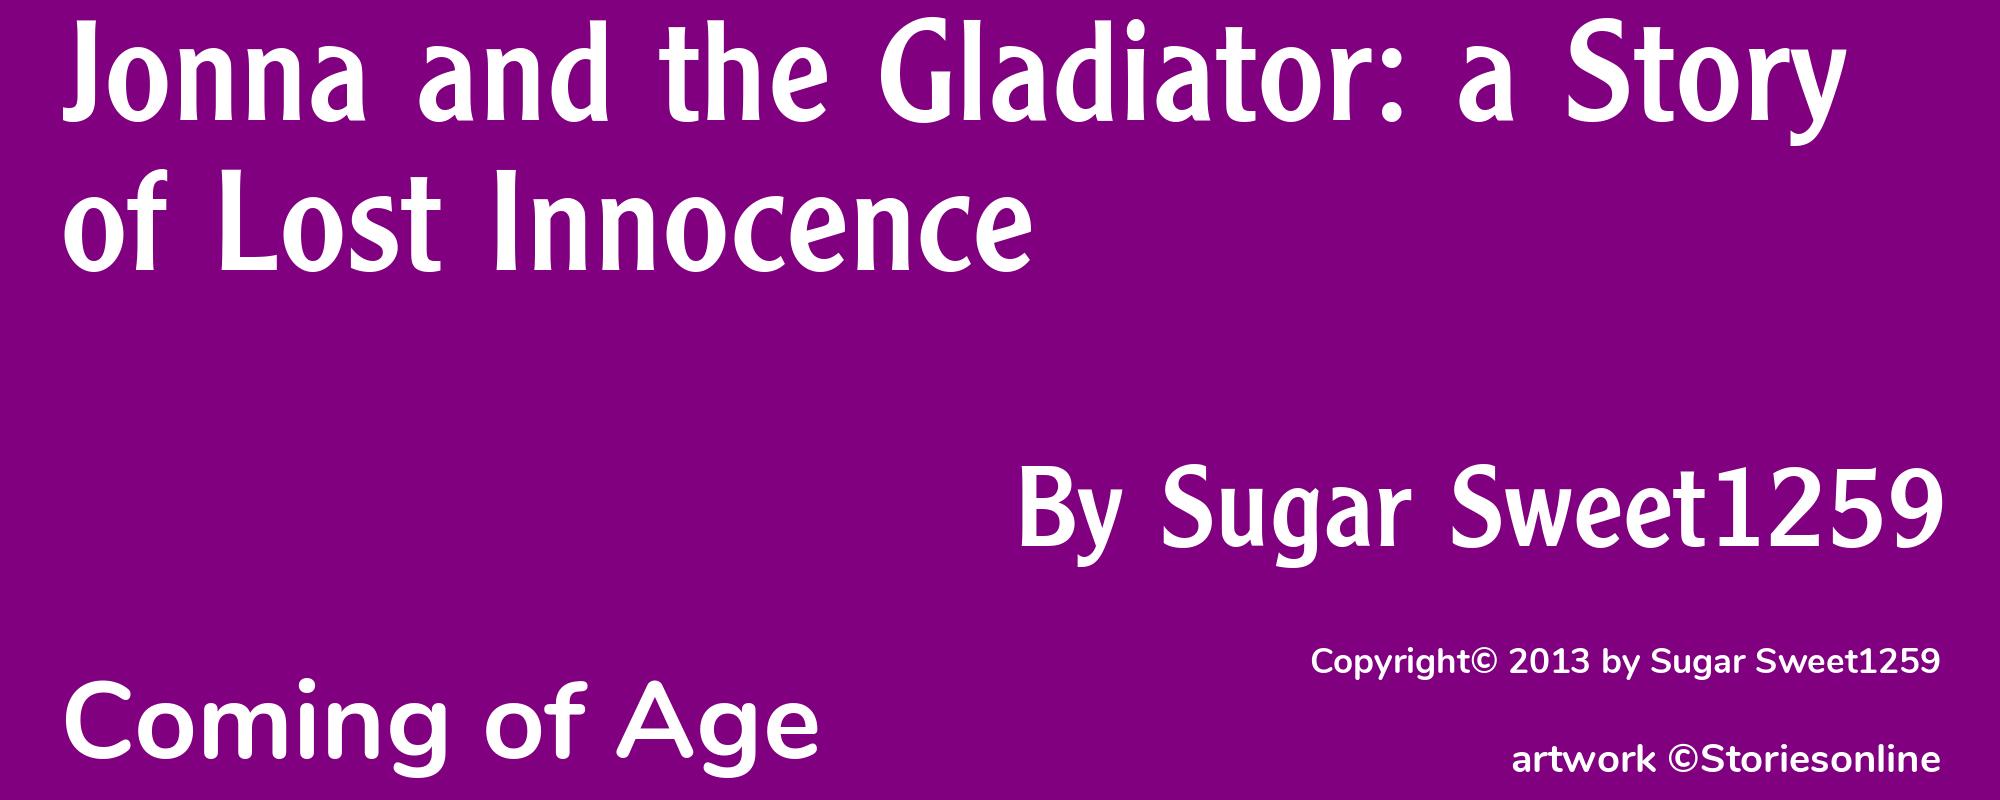 Jonna and the Gladiator: a Story of Lost Innocence - Cover